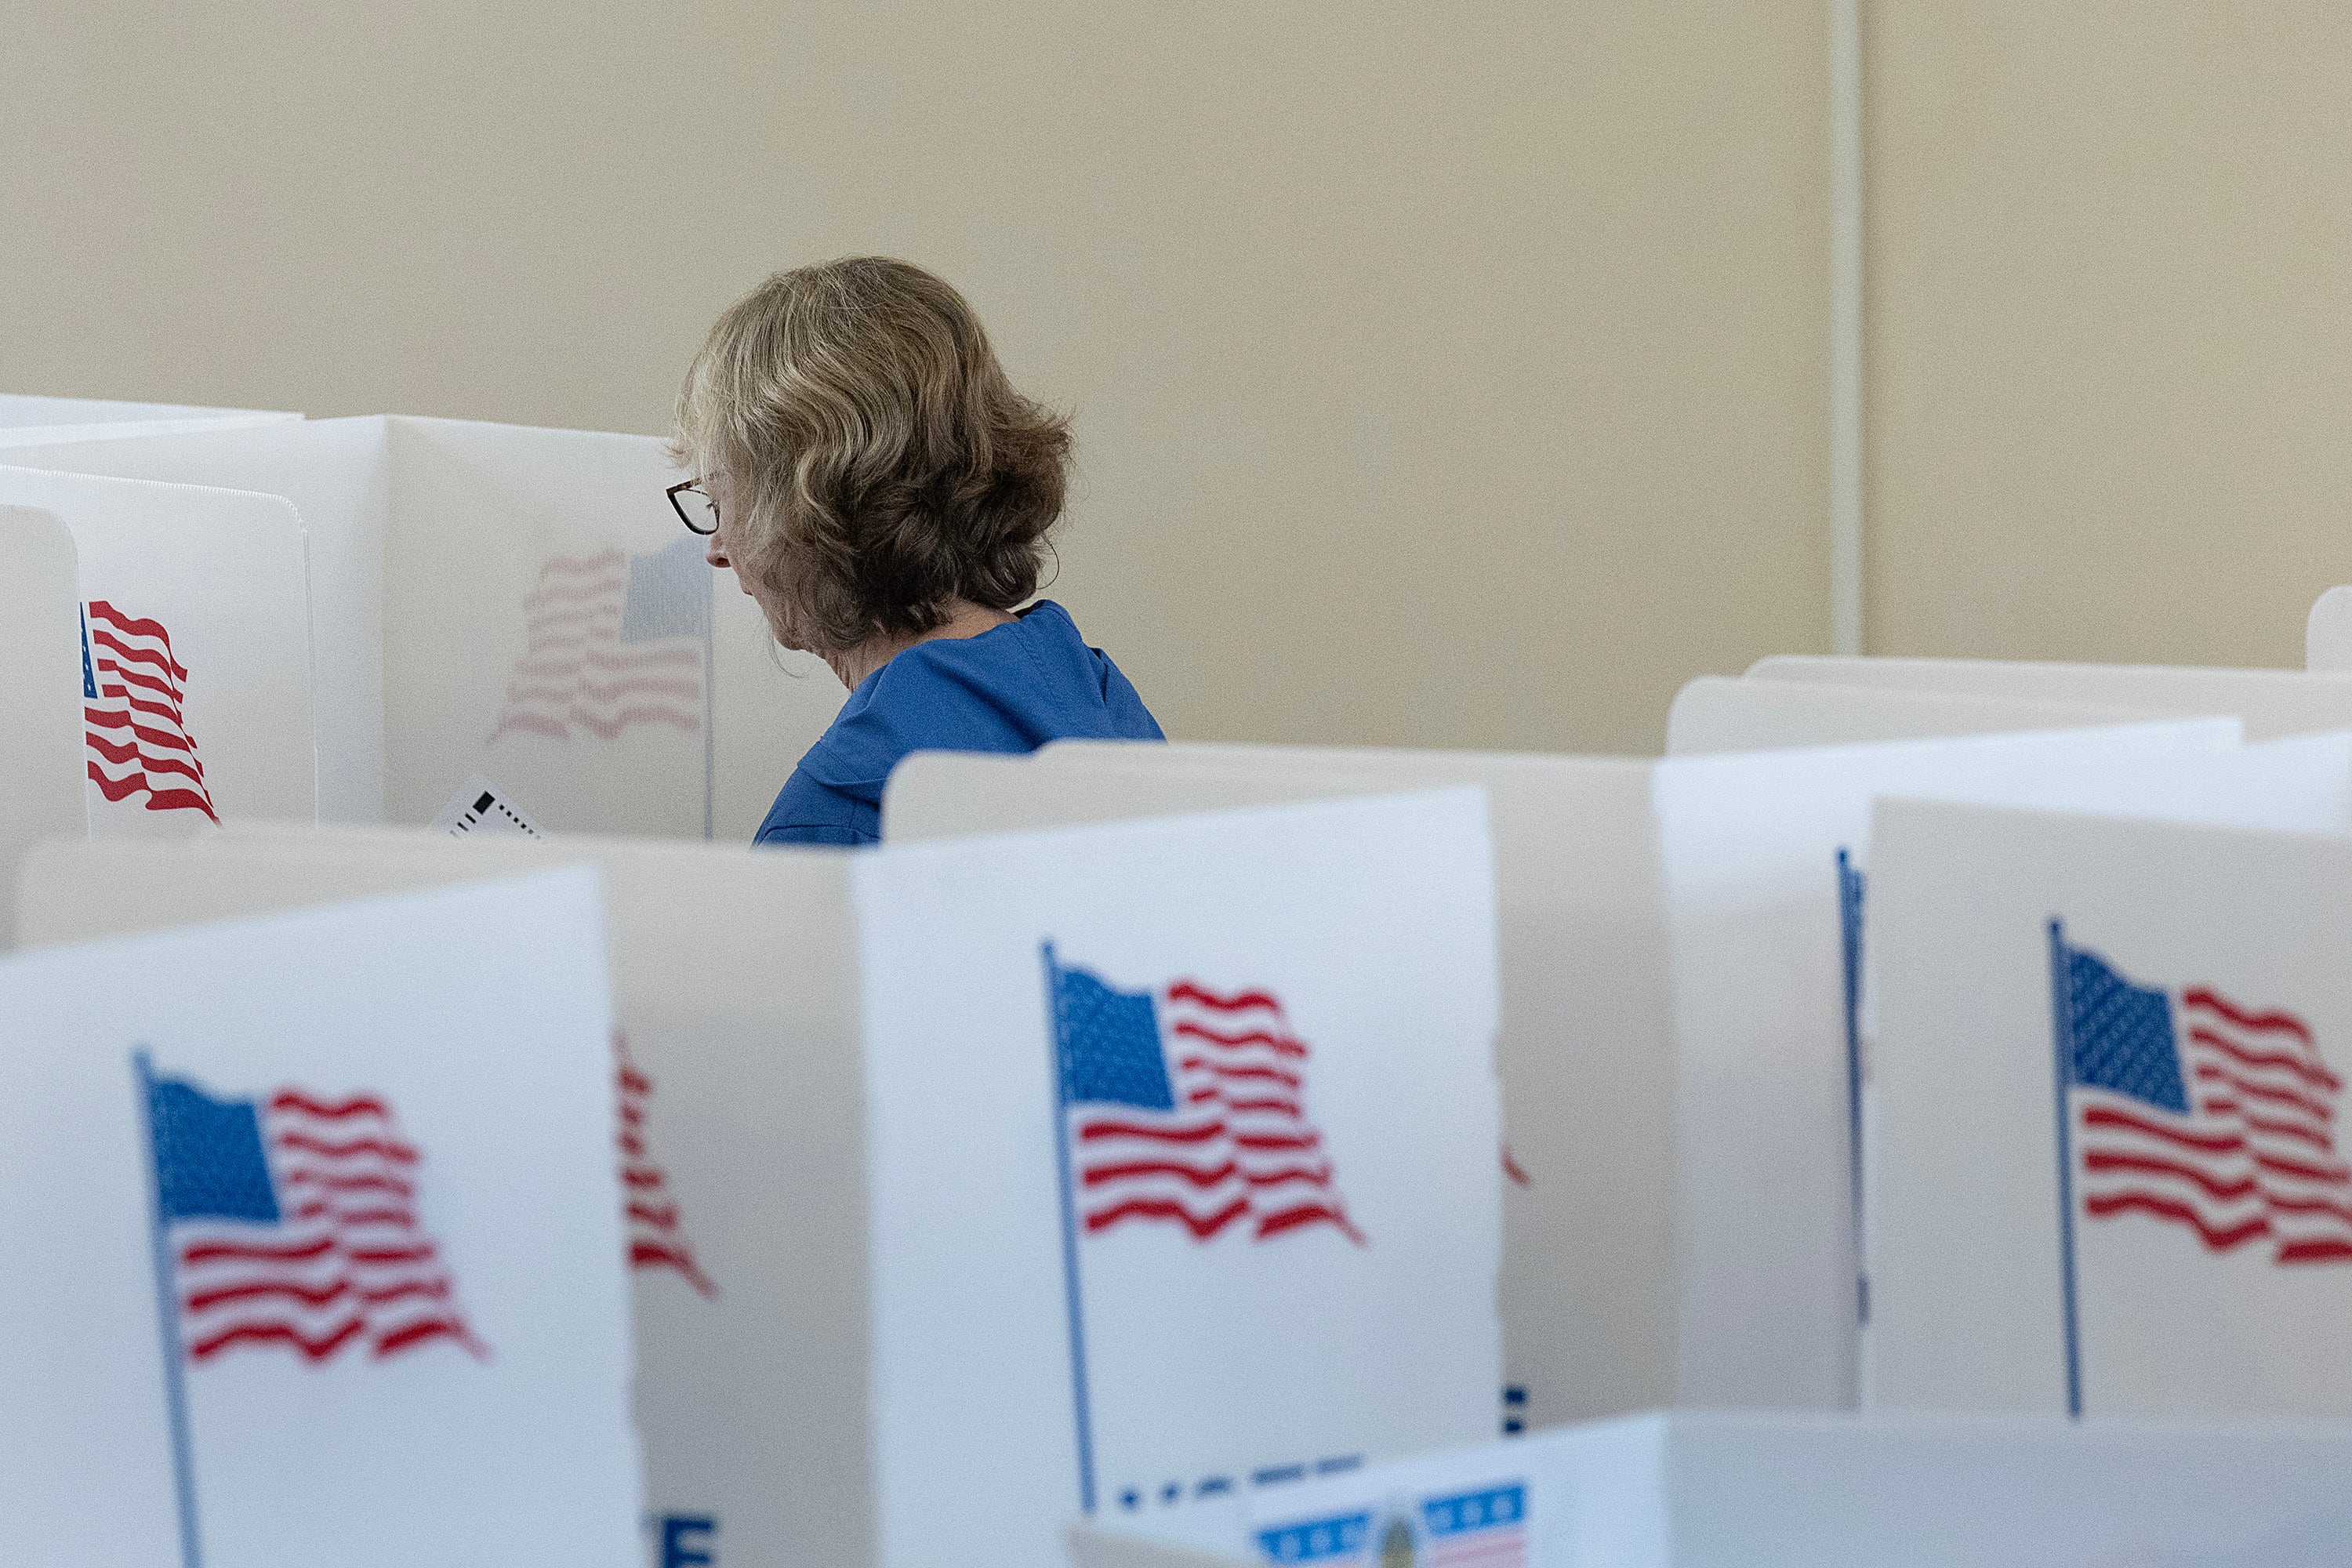 A person with short blonde hair and wearing a blue shirt is seen through rows of white voting dividers, each have a blue and red American flag on them. A tan wall in the background.